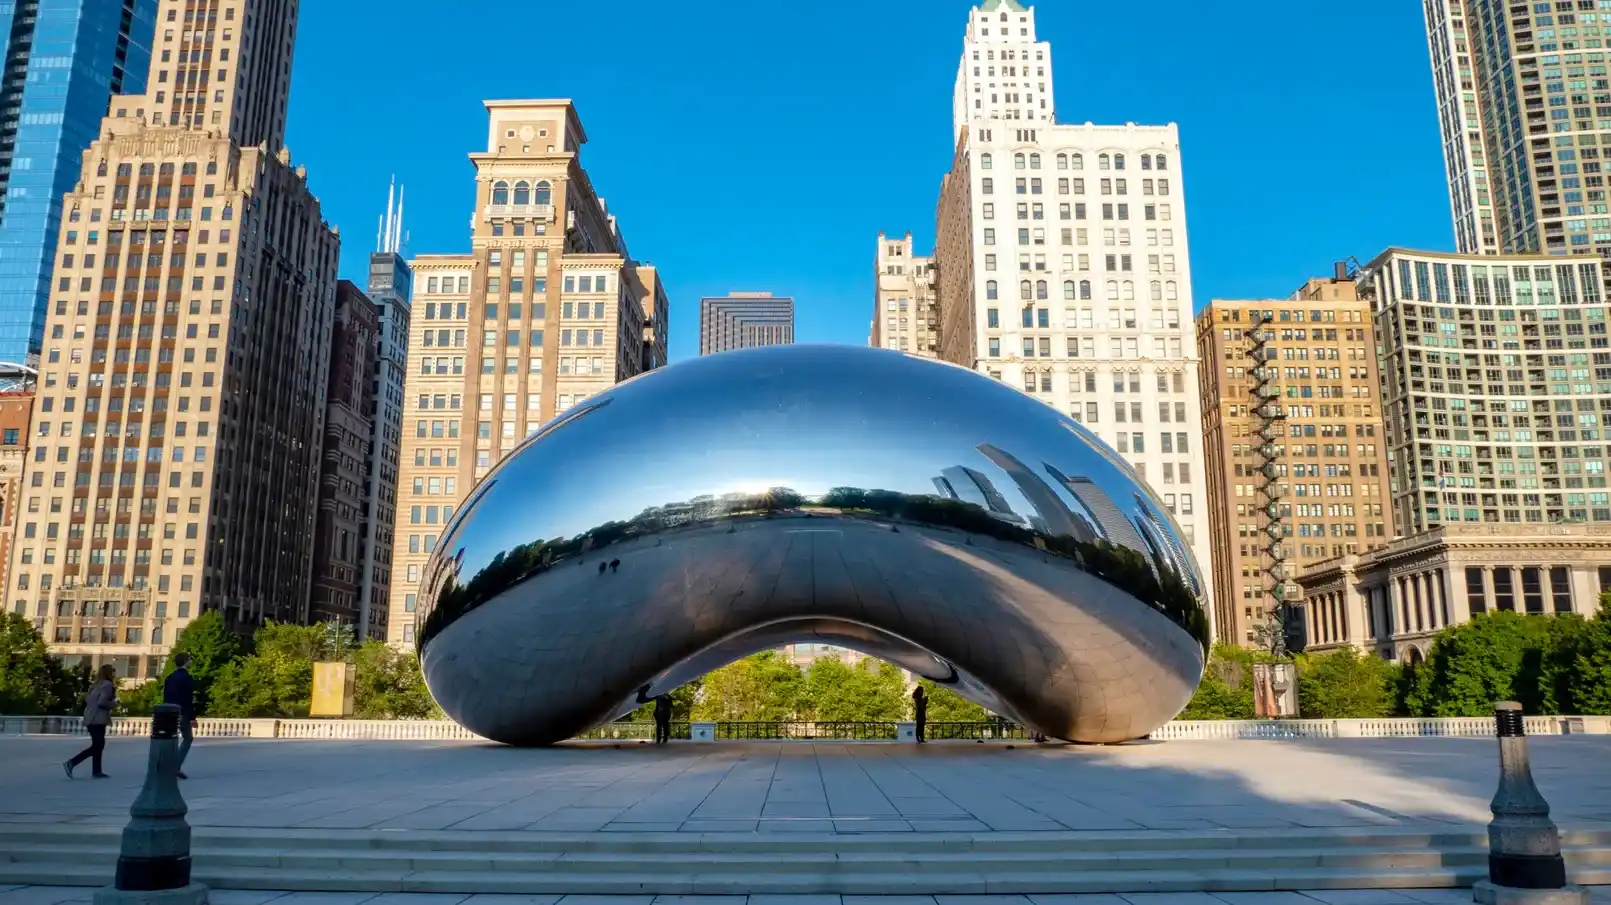 iconic Cloud Gate sculpture, known as The Bean, in Millennium Park, reflecting the Chicago skyline